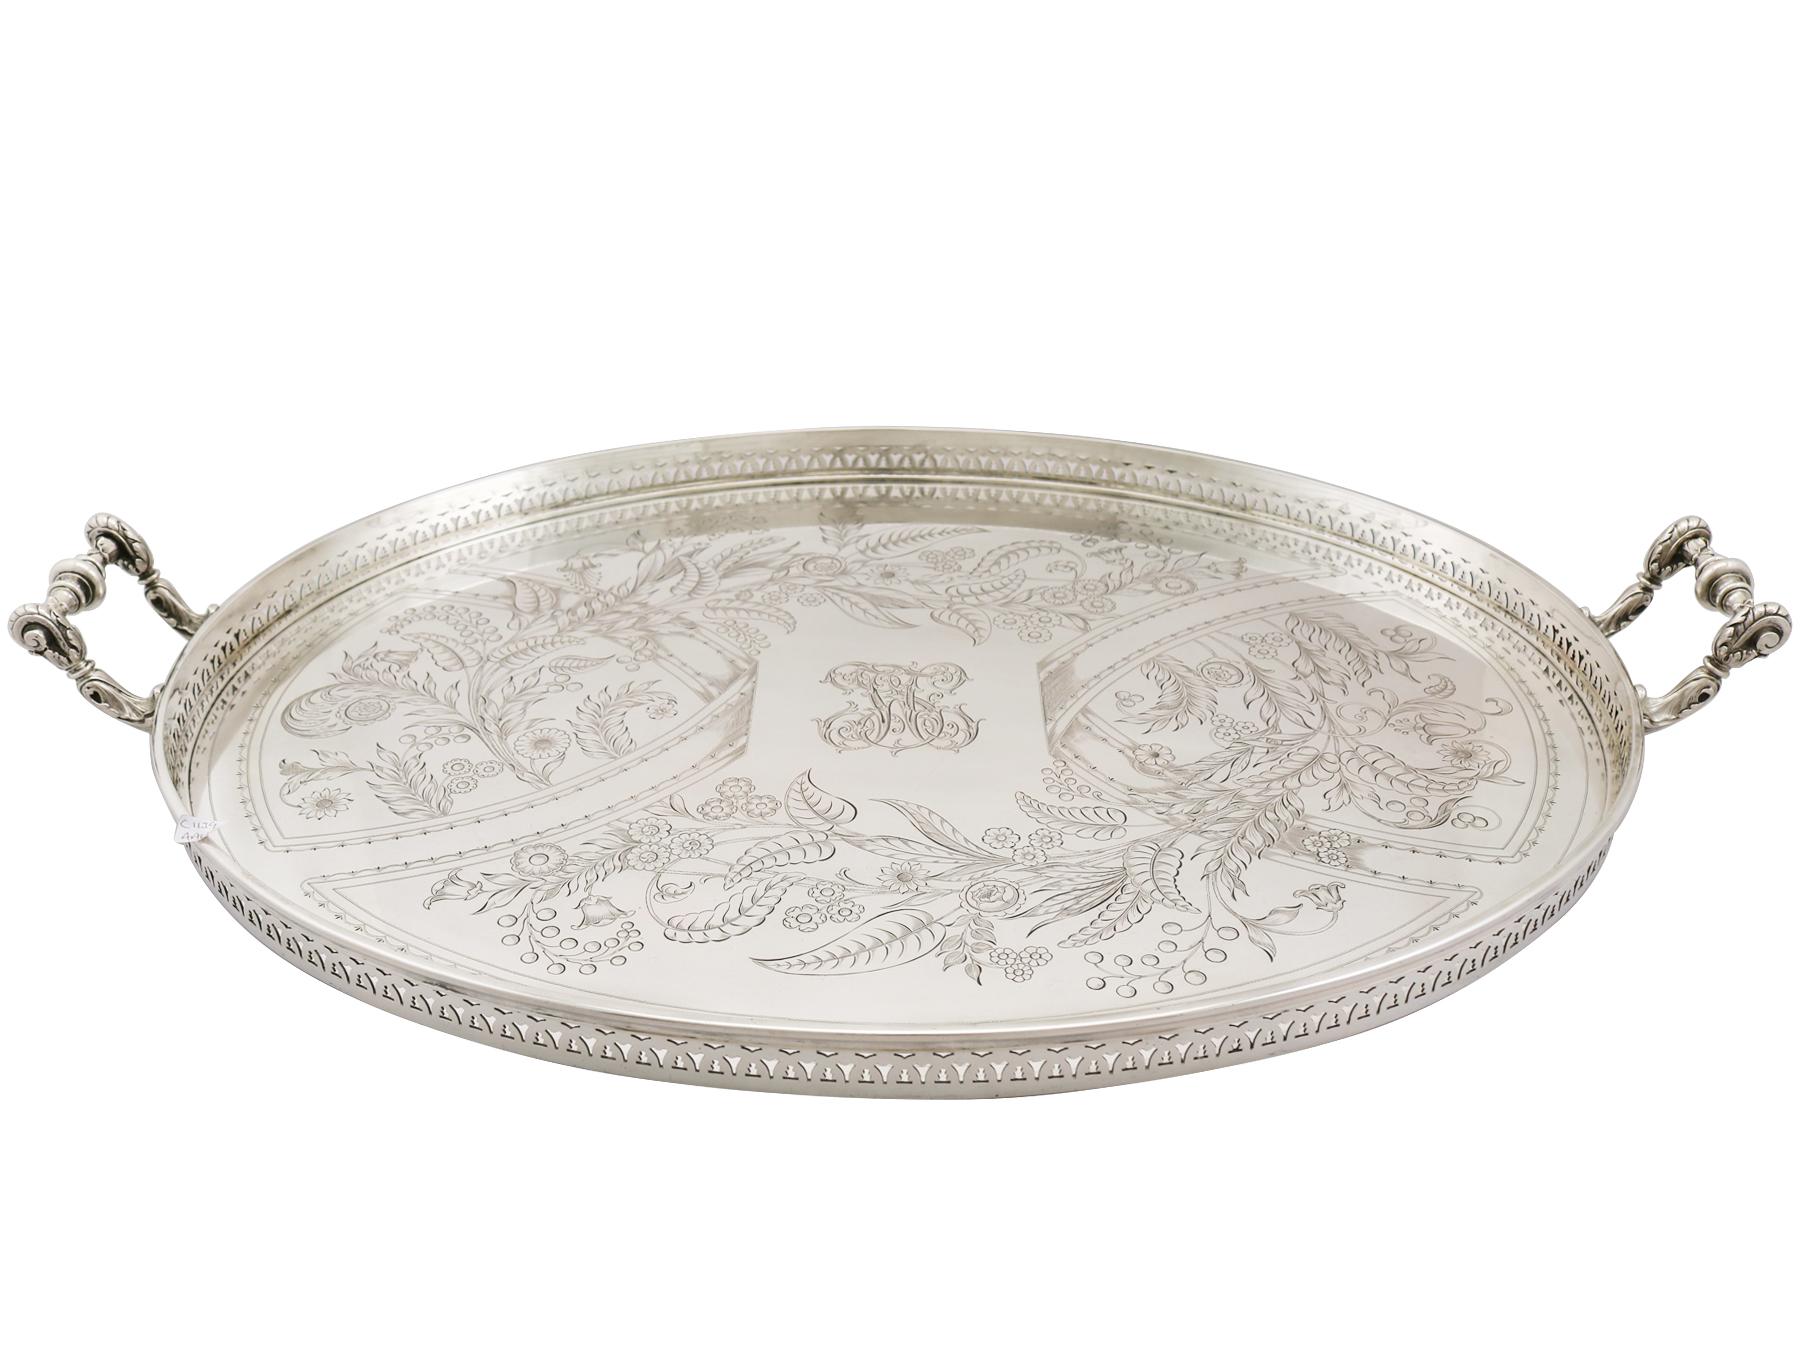 An exceptional, fine and impressive, large antique German silver galleried tea tray; an addition to our silver teaware collection.

This exceptional antique German silver gallery tray has a plain oval form.

The large surface of this antique silver